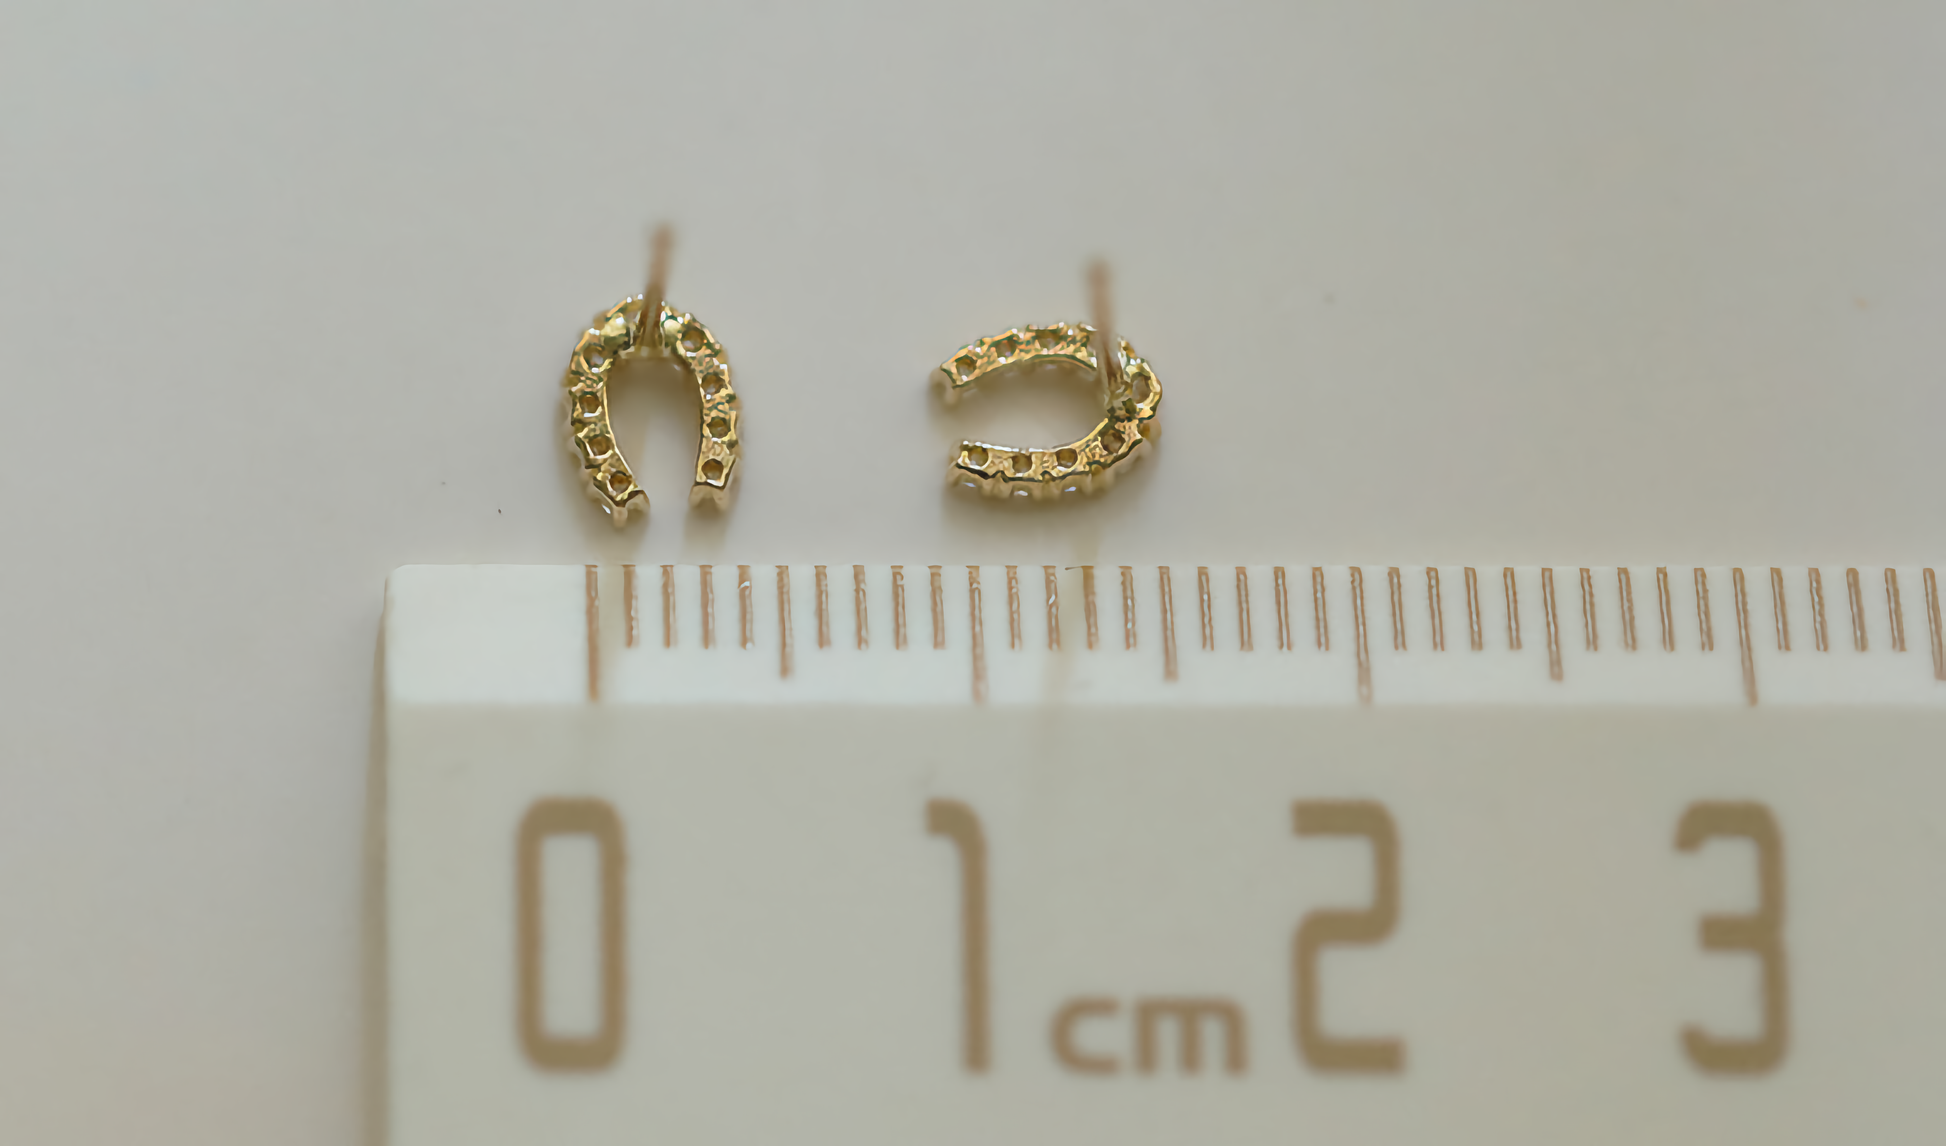 A pair of 9ct solid gold horseshoe earrings, delicately crafted to serve as both a fashionable accessory and a lucky charm. Measuring 5mm dainty size.